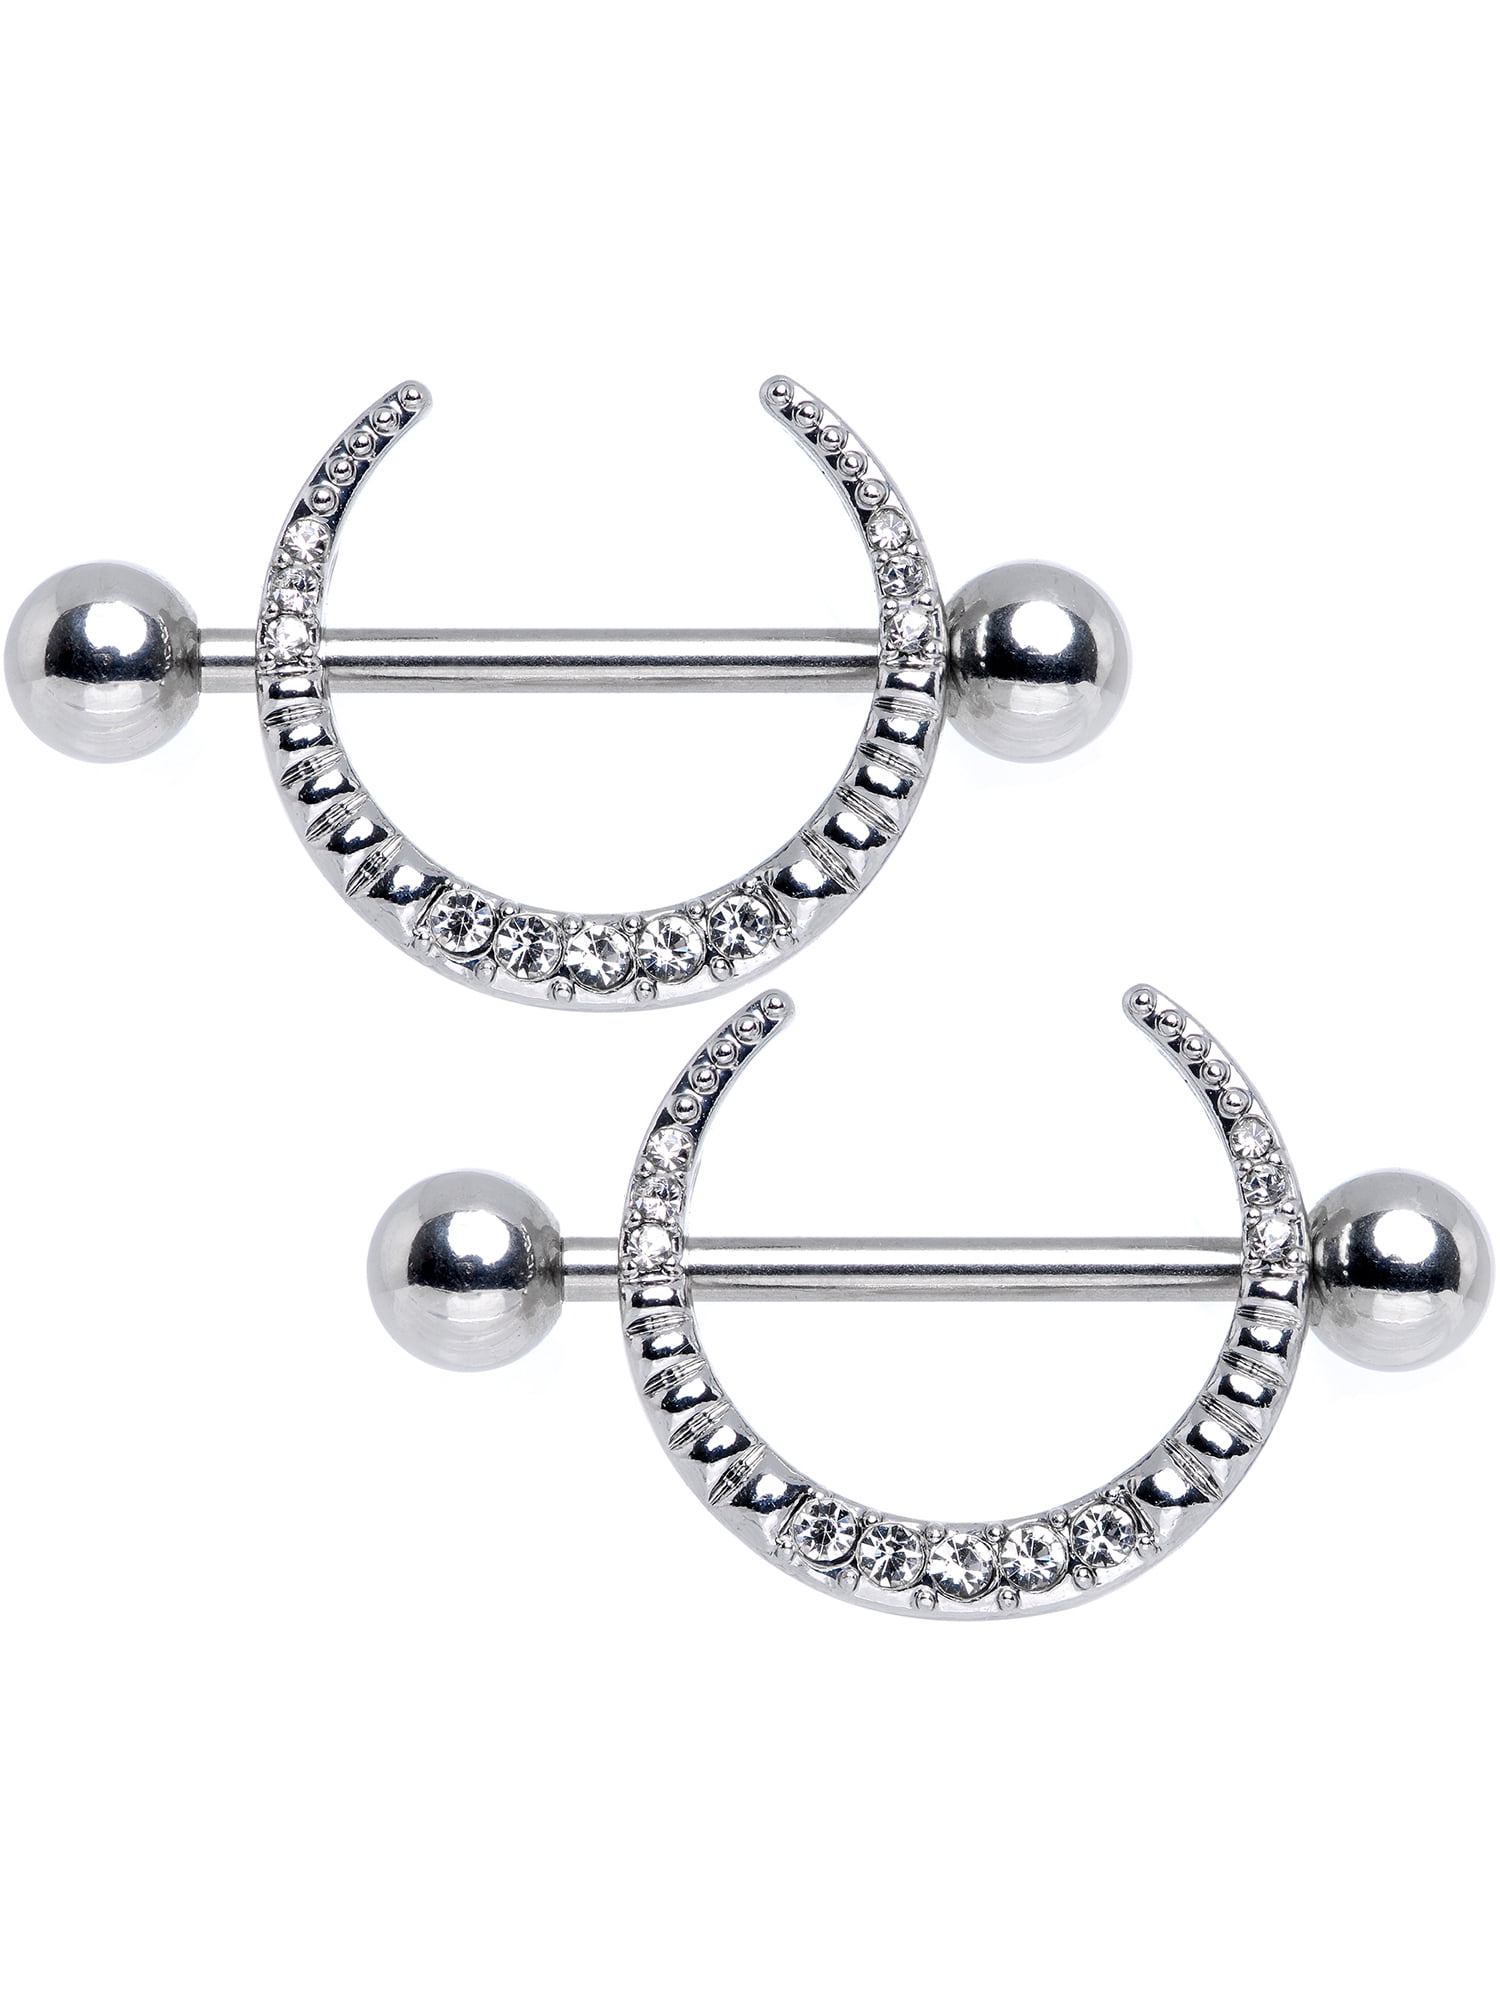 Dollar Sign Cash Money Nipple Shield Rings Barbell Barbells Sold as a Pair 